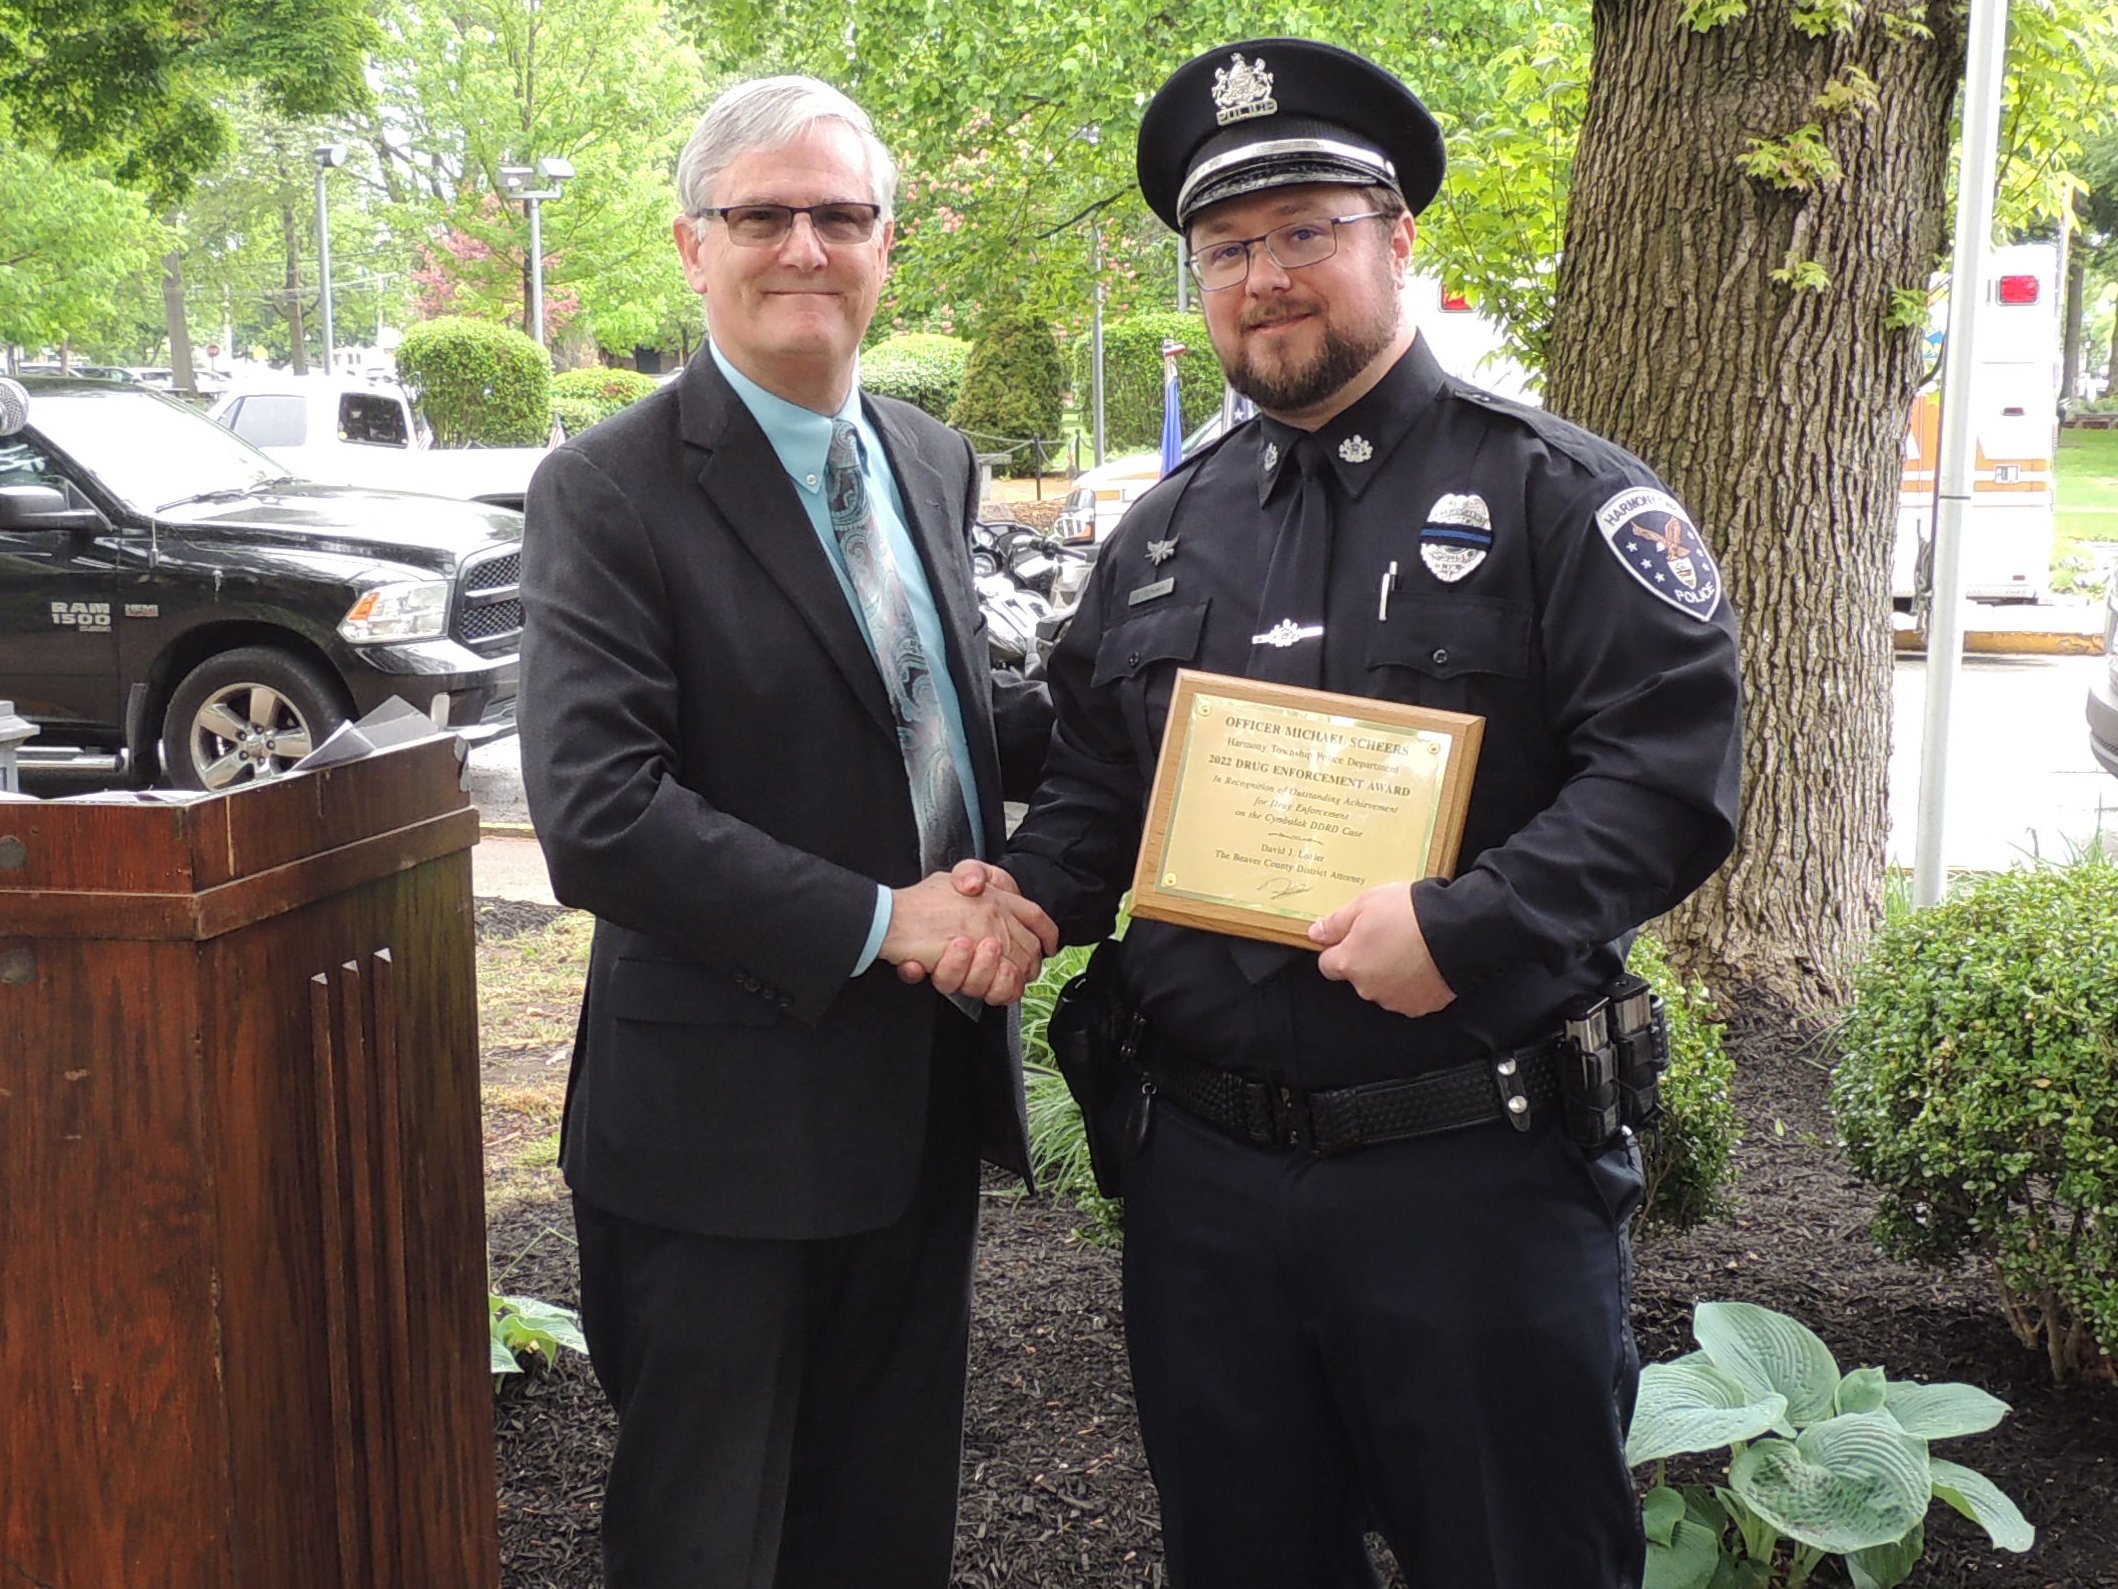 District Attorney David Lozier presents the Drug Enforcement Award to Officer Michael Scheers, Harmony Township Police Department.